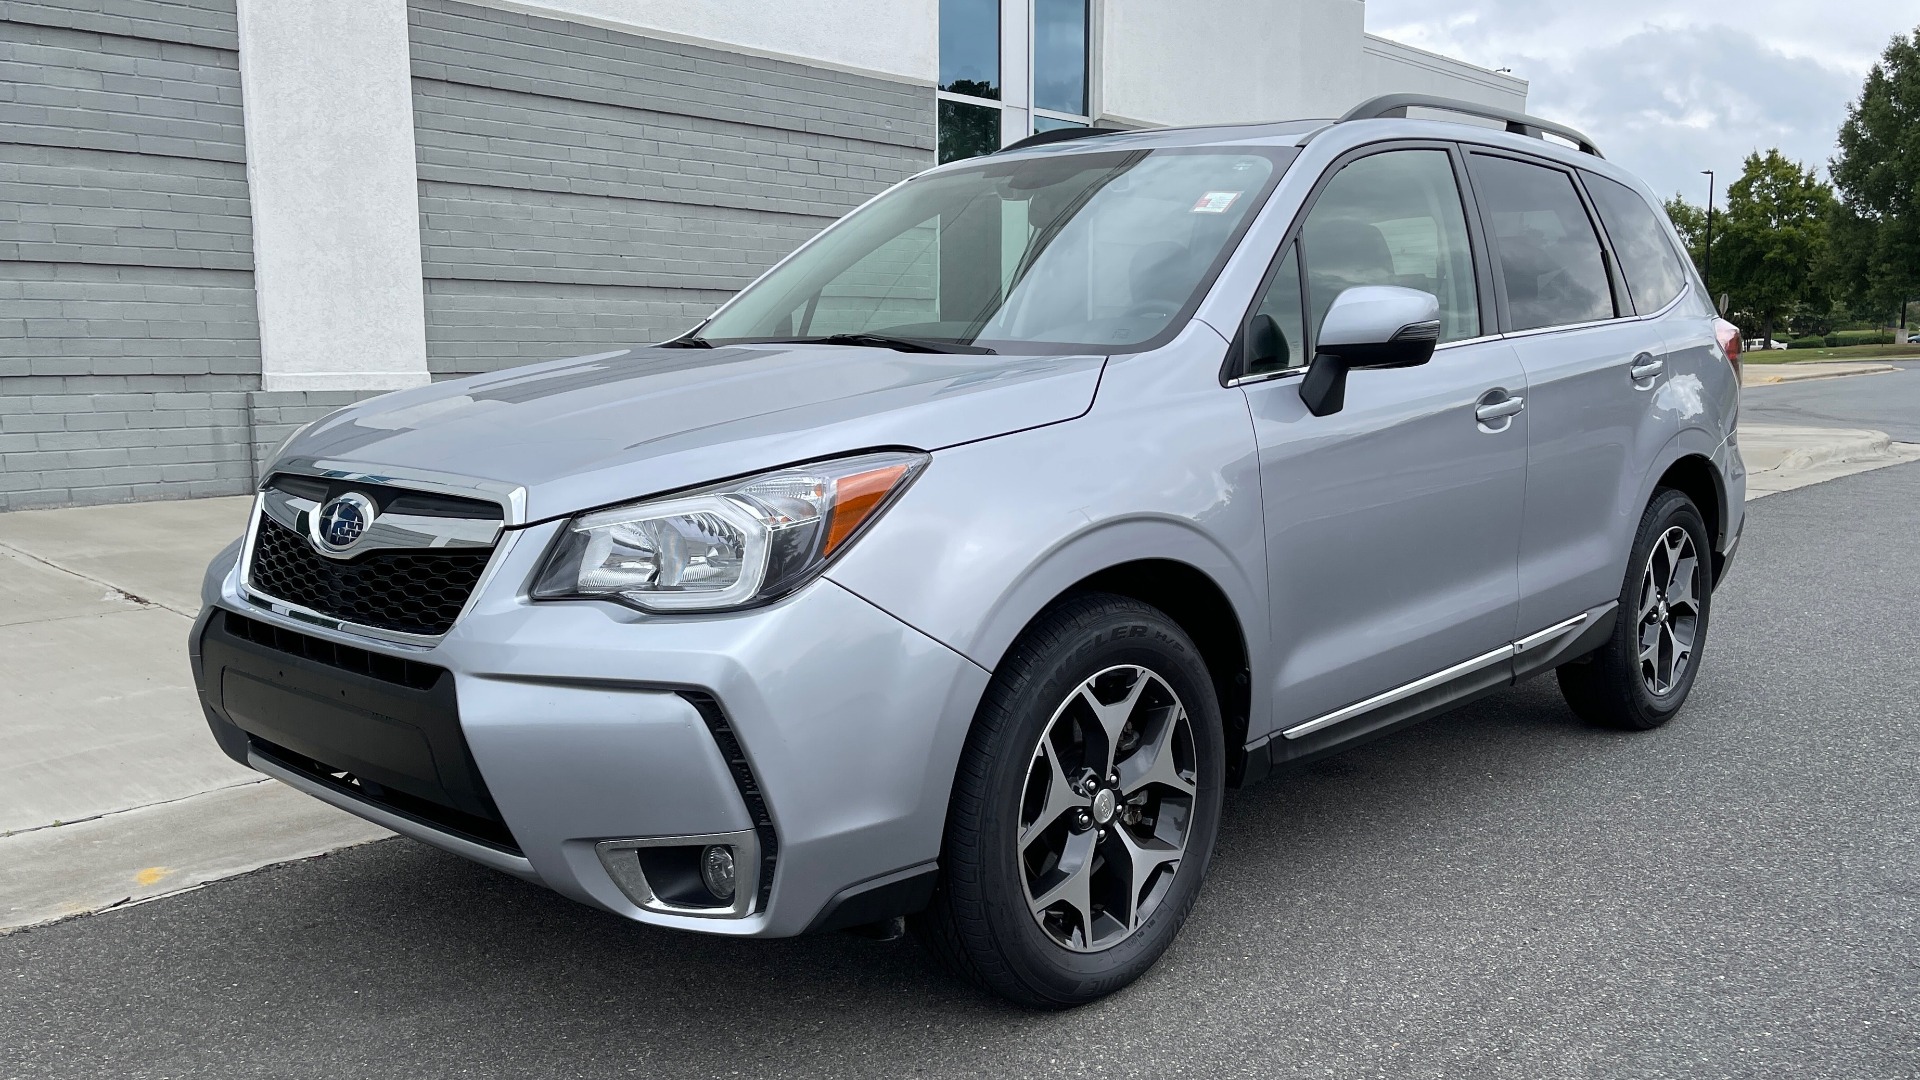 Used 2016 Subaru FORESTER 2.0XT TOURING / NAV / SUNROOF / ADAPT CRS / PRE-COLLISION / REARVIEW for sale Sold at Formula Imports in Charlotte NC 28227 3